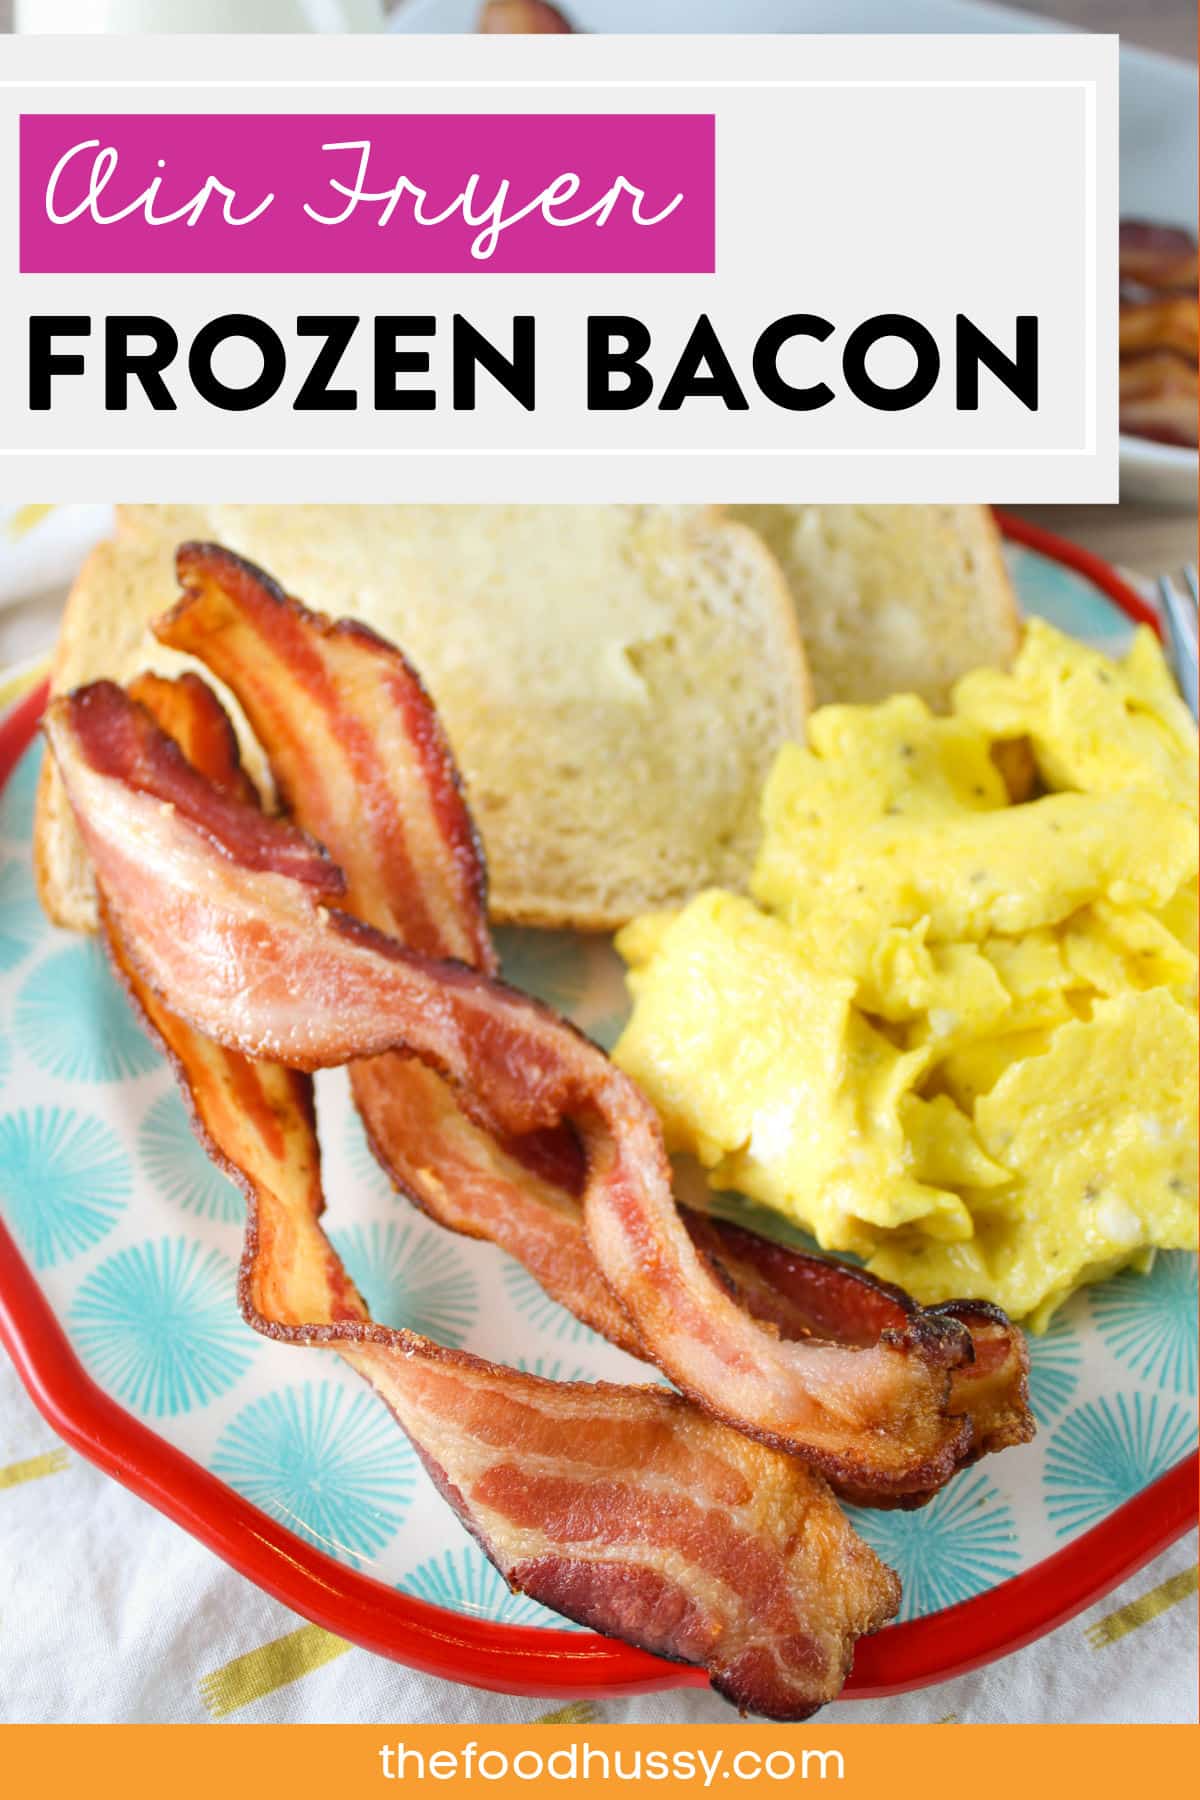 Frozen bacon in the air fryer is a game changer when you're cooking for a crowd. No mess and no prep! Out of the freezer and into the air fryer! Whether you like crispy bacon or limp bacon - you can have it your way when you make it in the Air Fryer!  via @foodhussy